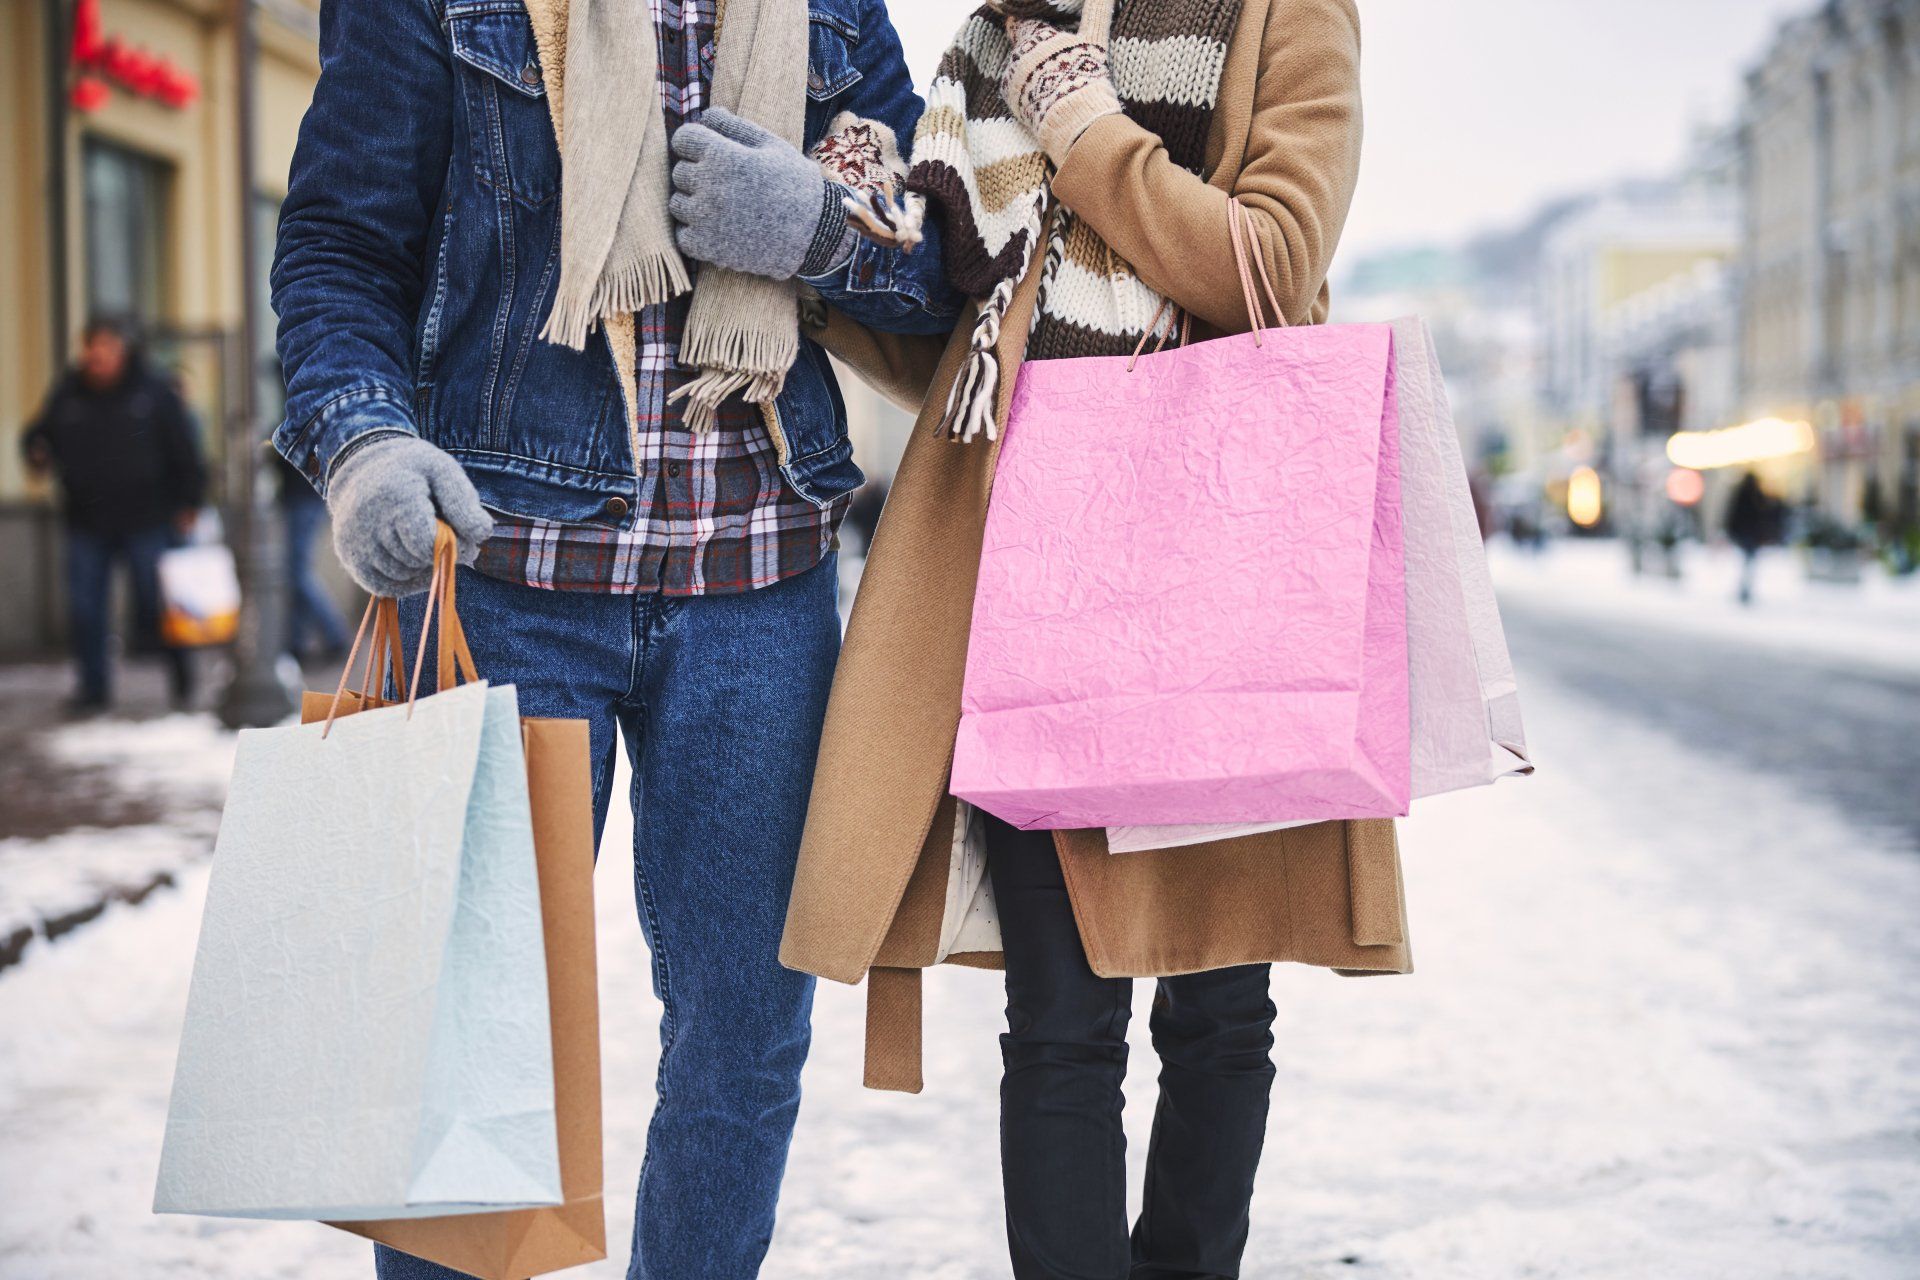 Couple shopping in the snow